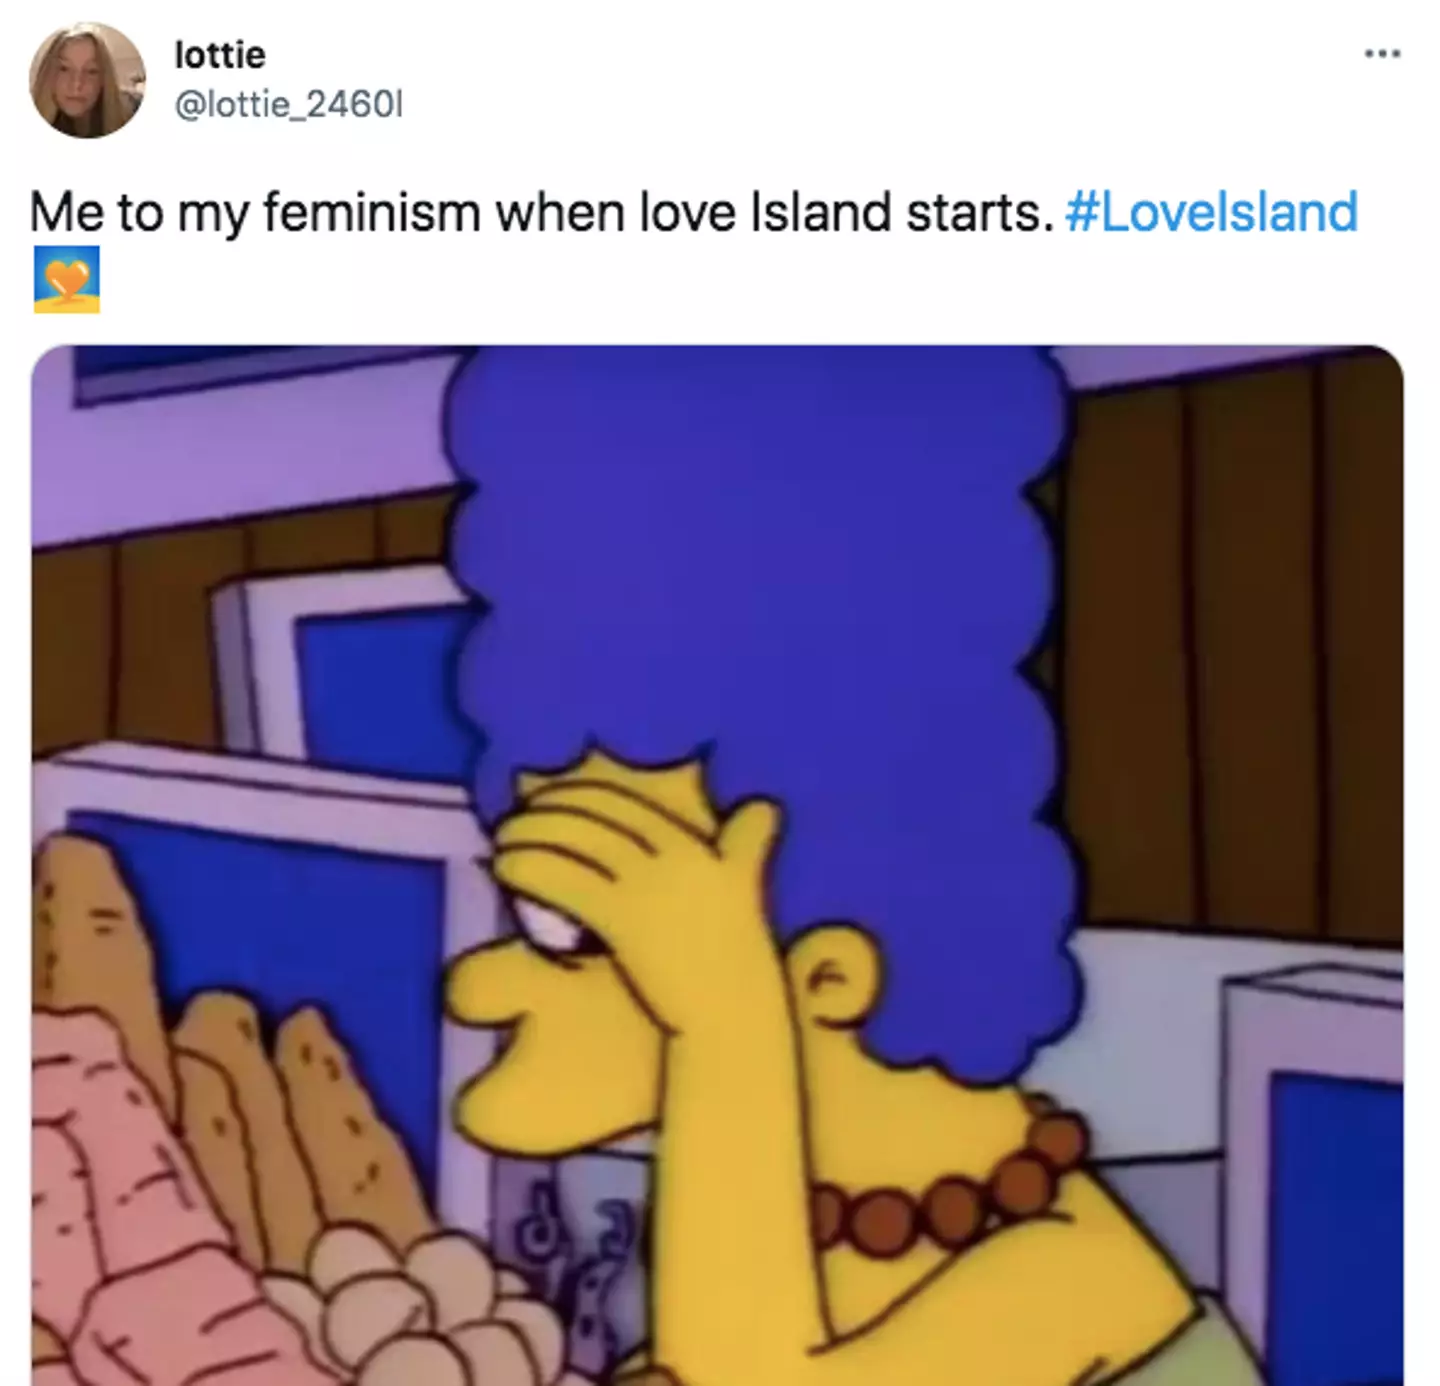 Some people dont think Love Island and feminism mix (